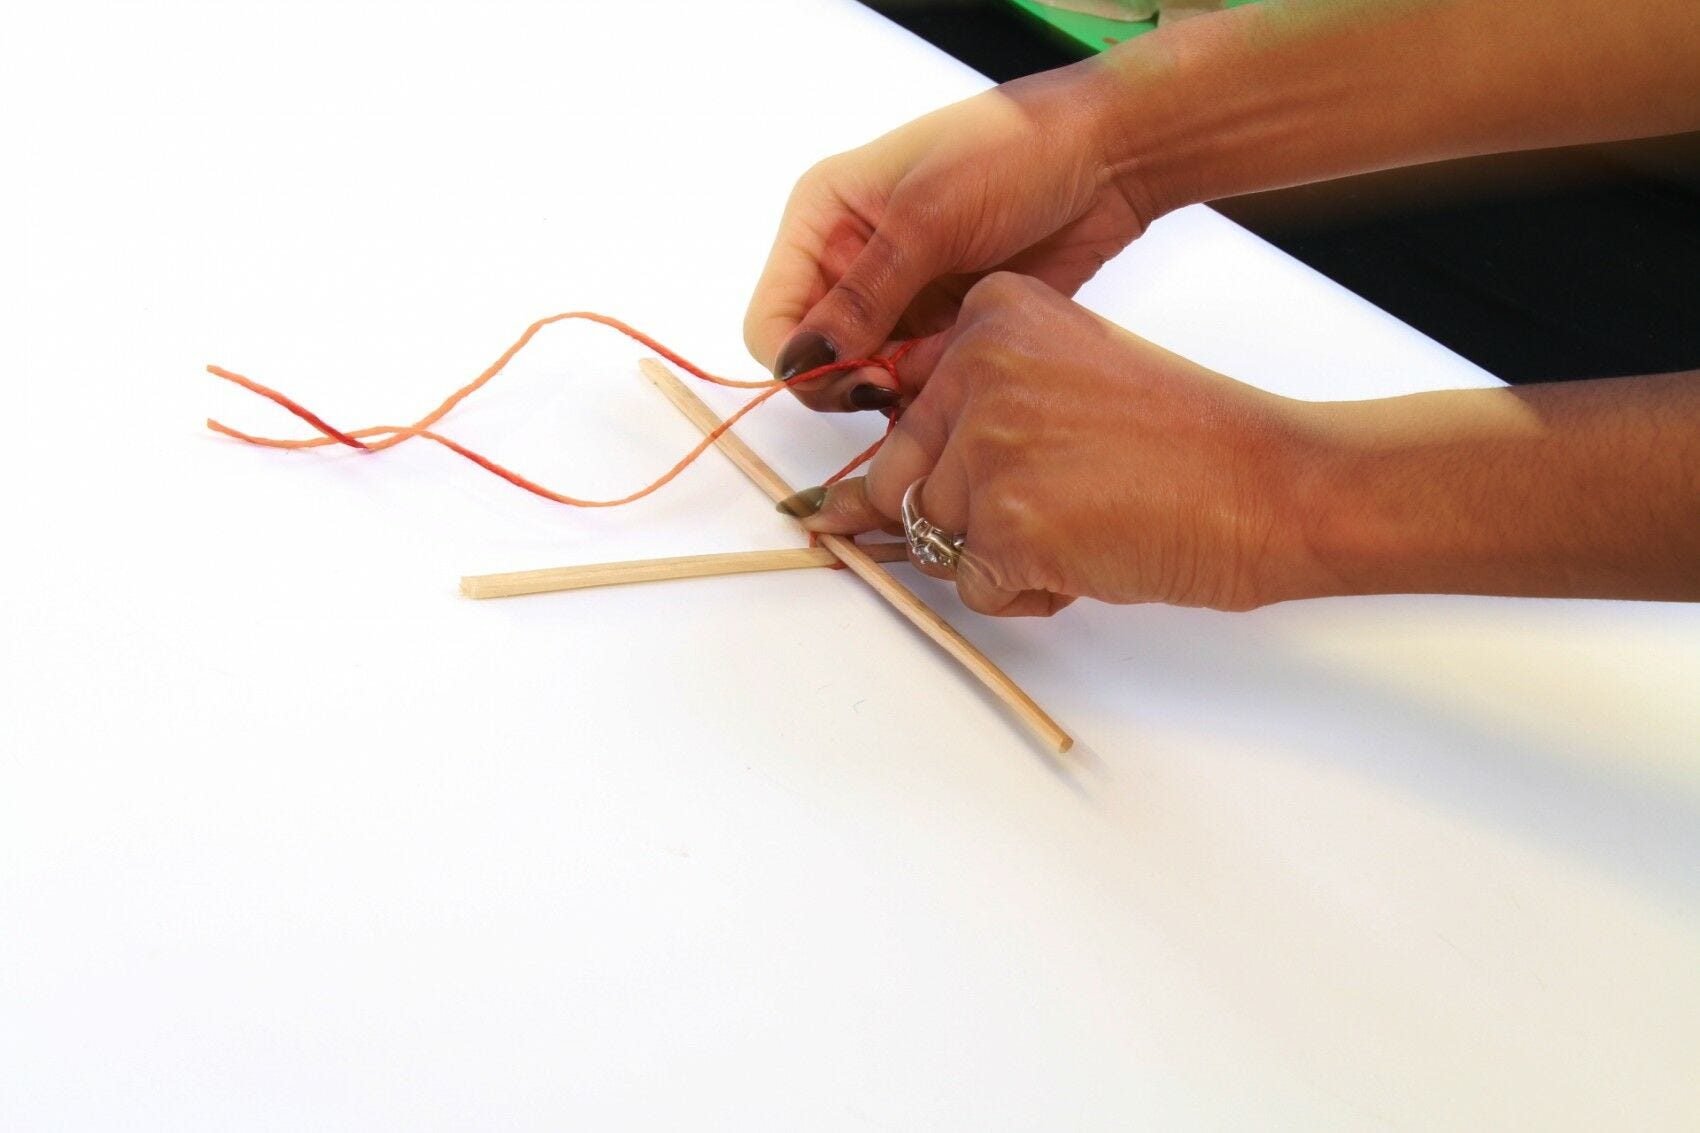 Tie chopsticks together with string